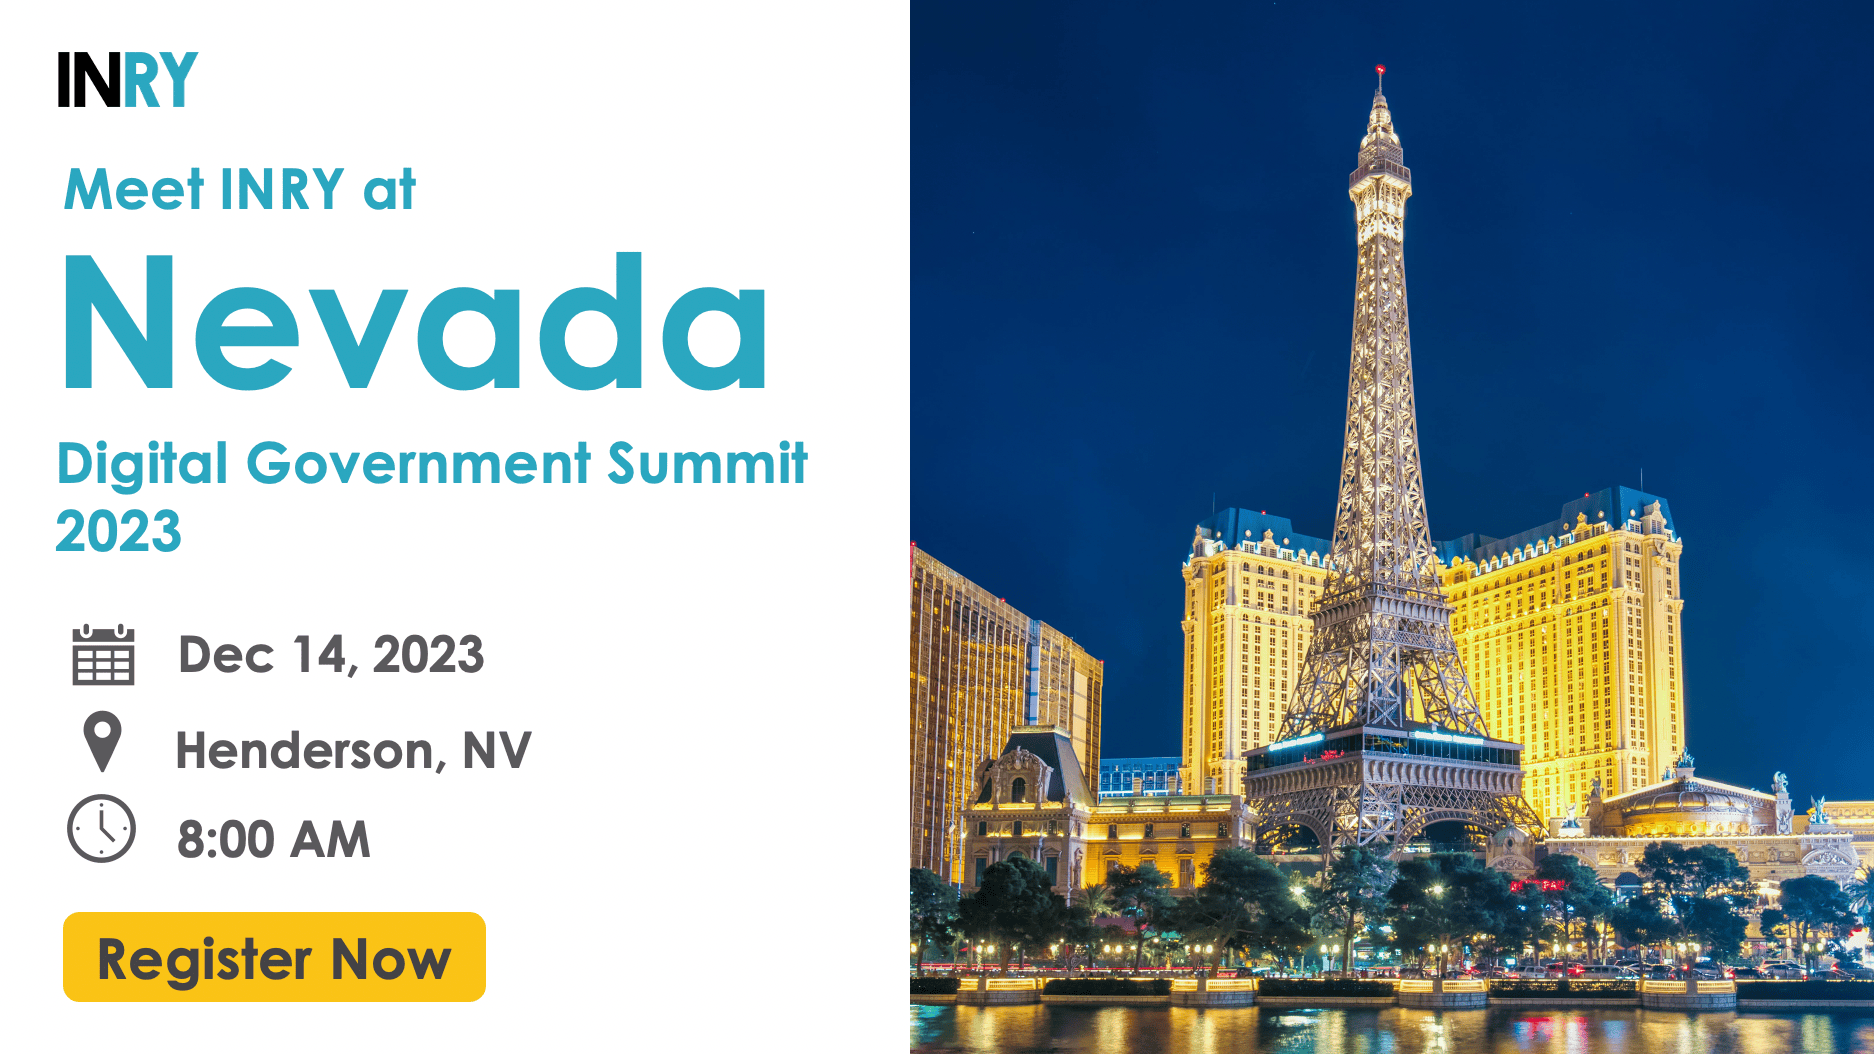 Meet INRY at ServiceNow Nevada Digital Government Summit